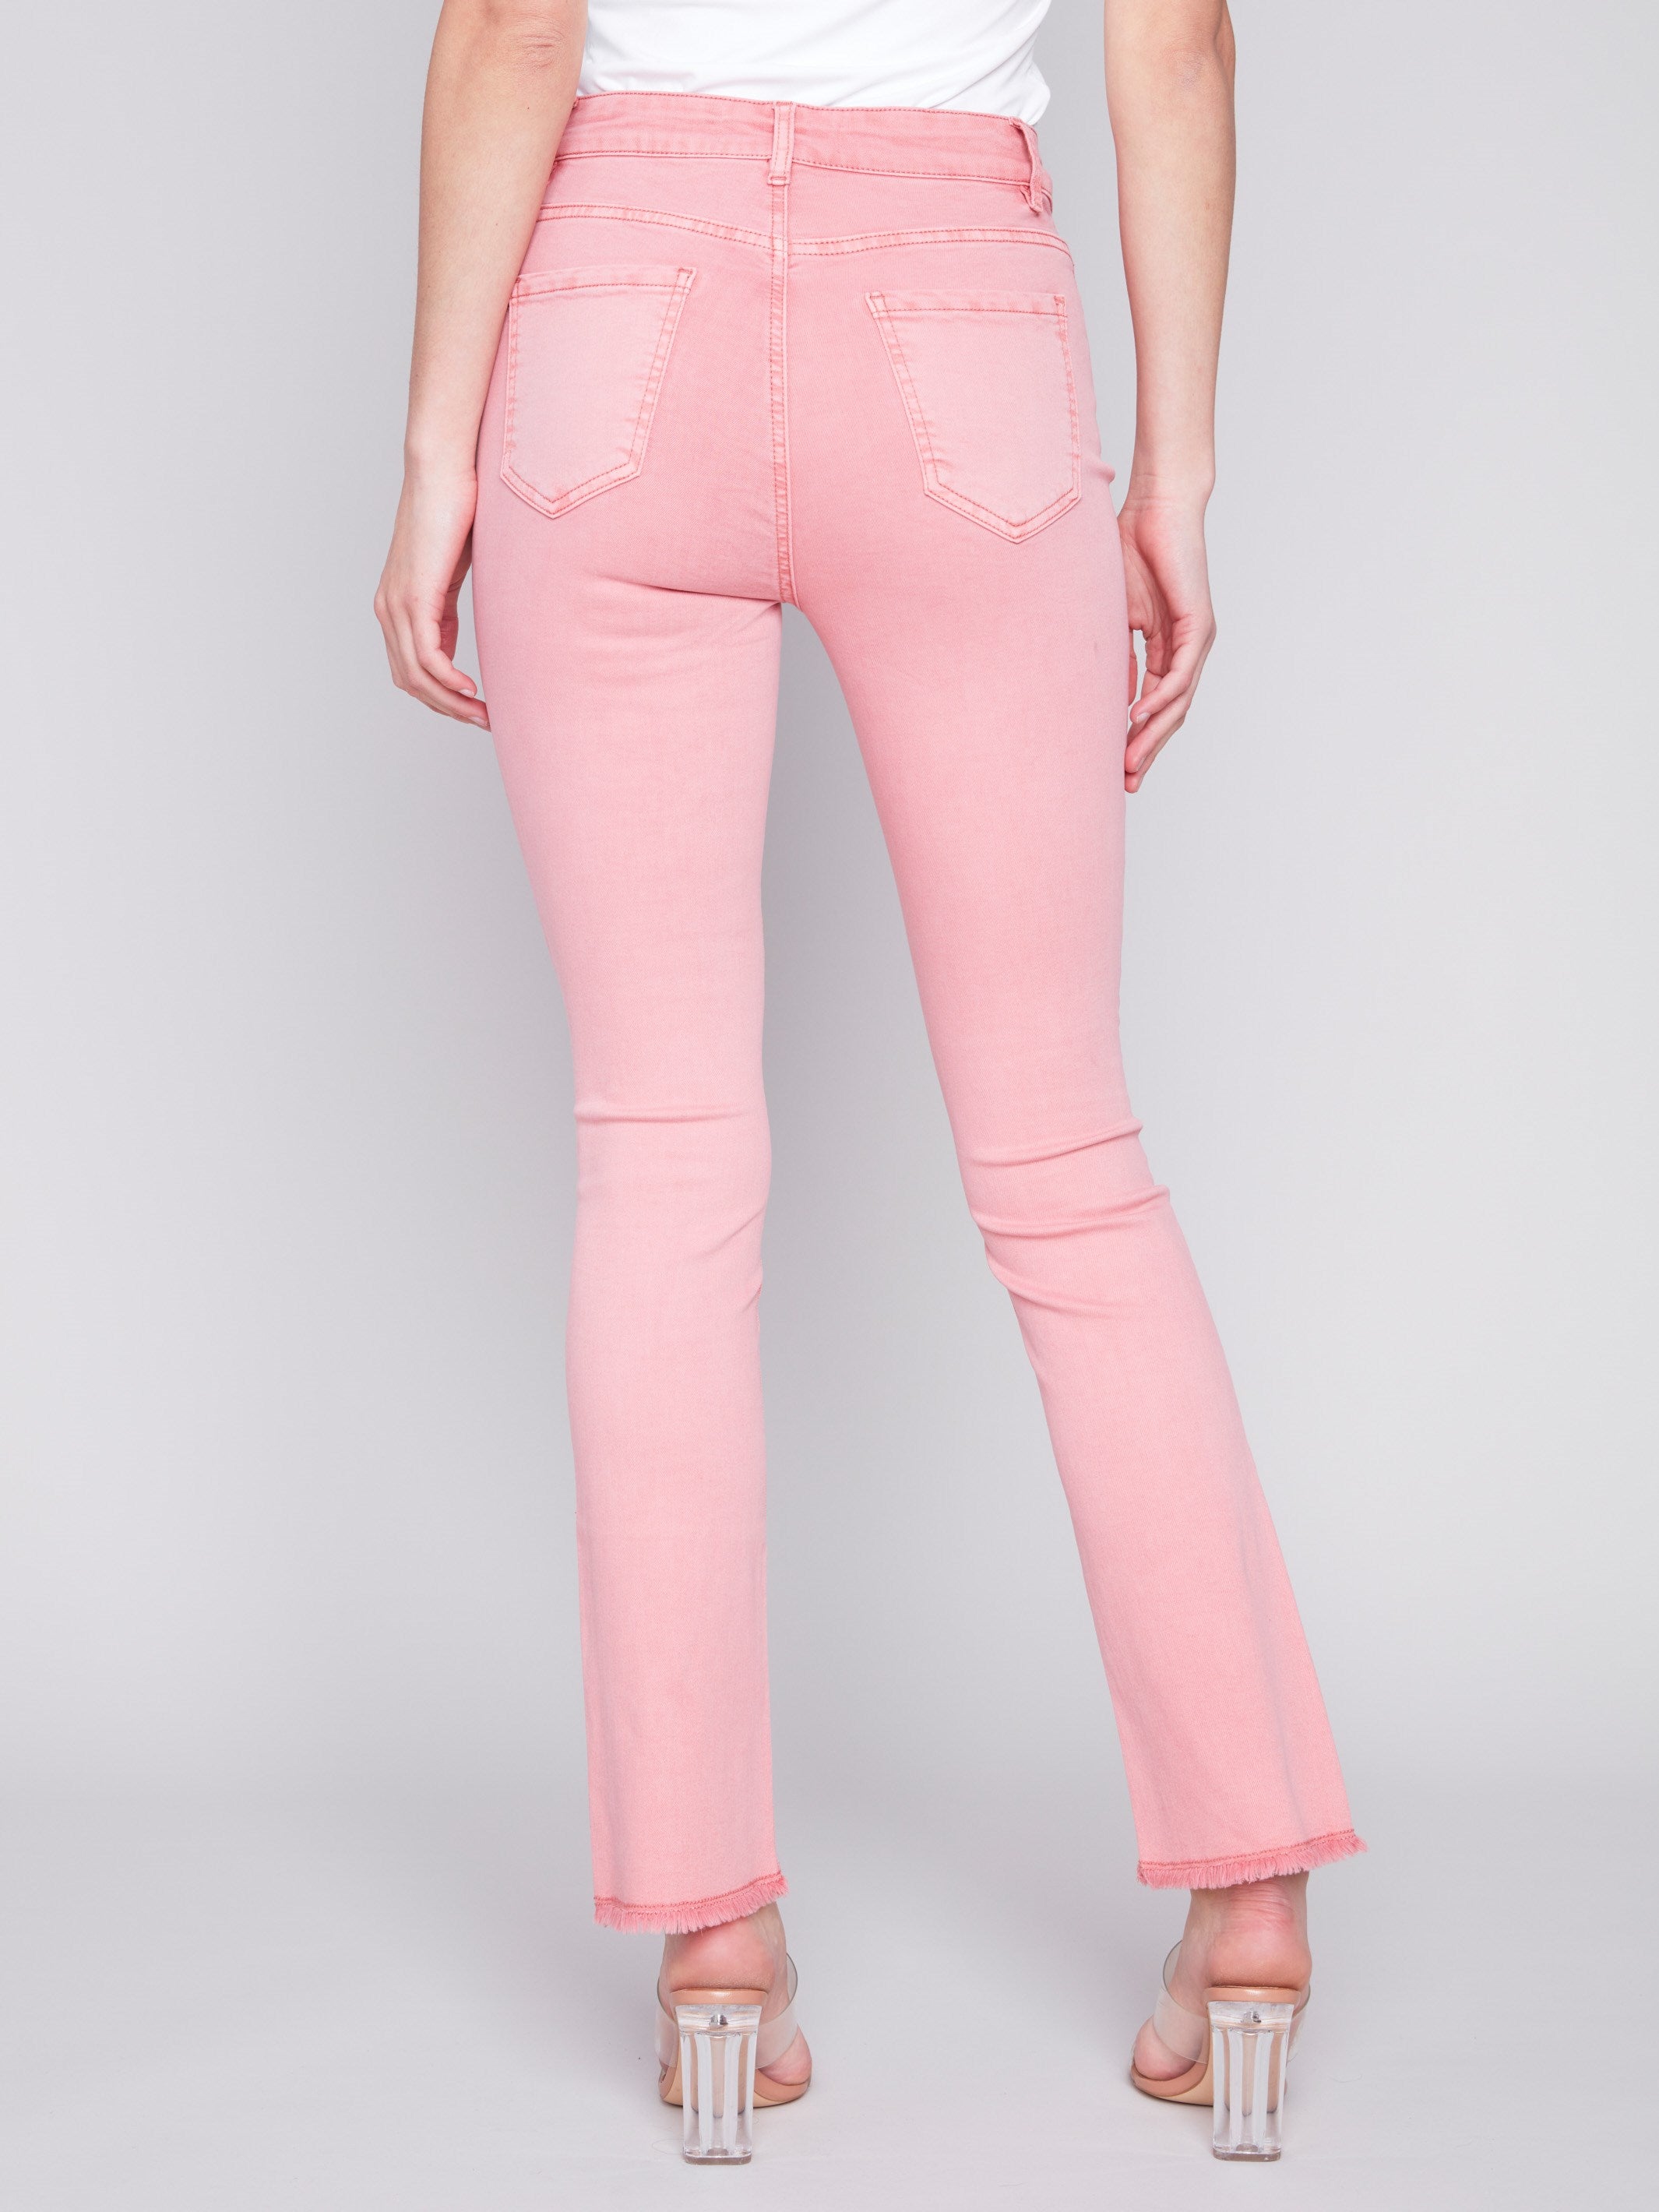 Bootcut Twill Pants with Asymmetrical Hem - Tulip - Charlie B Collection Canada - Image 3